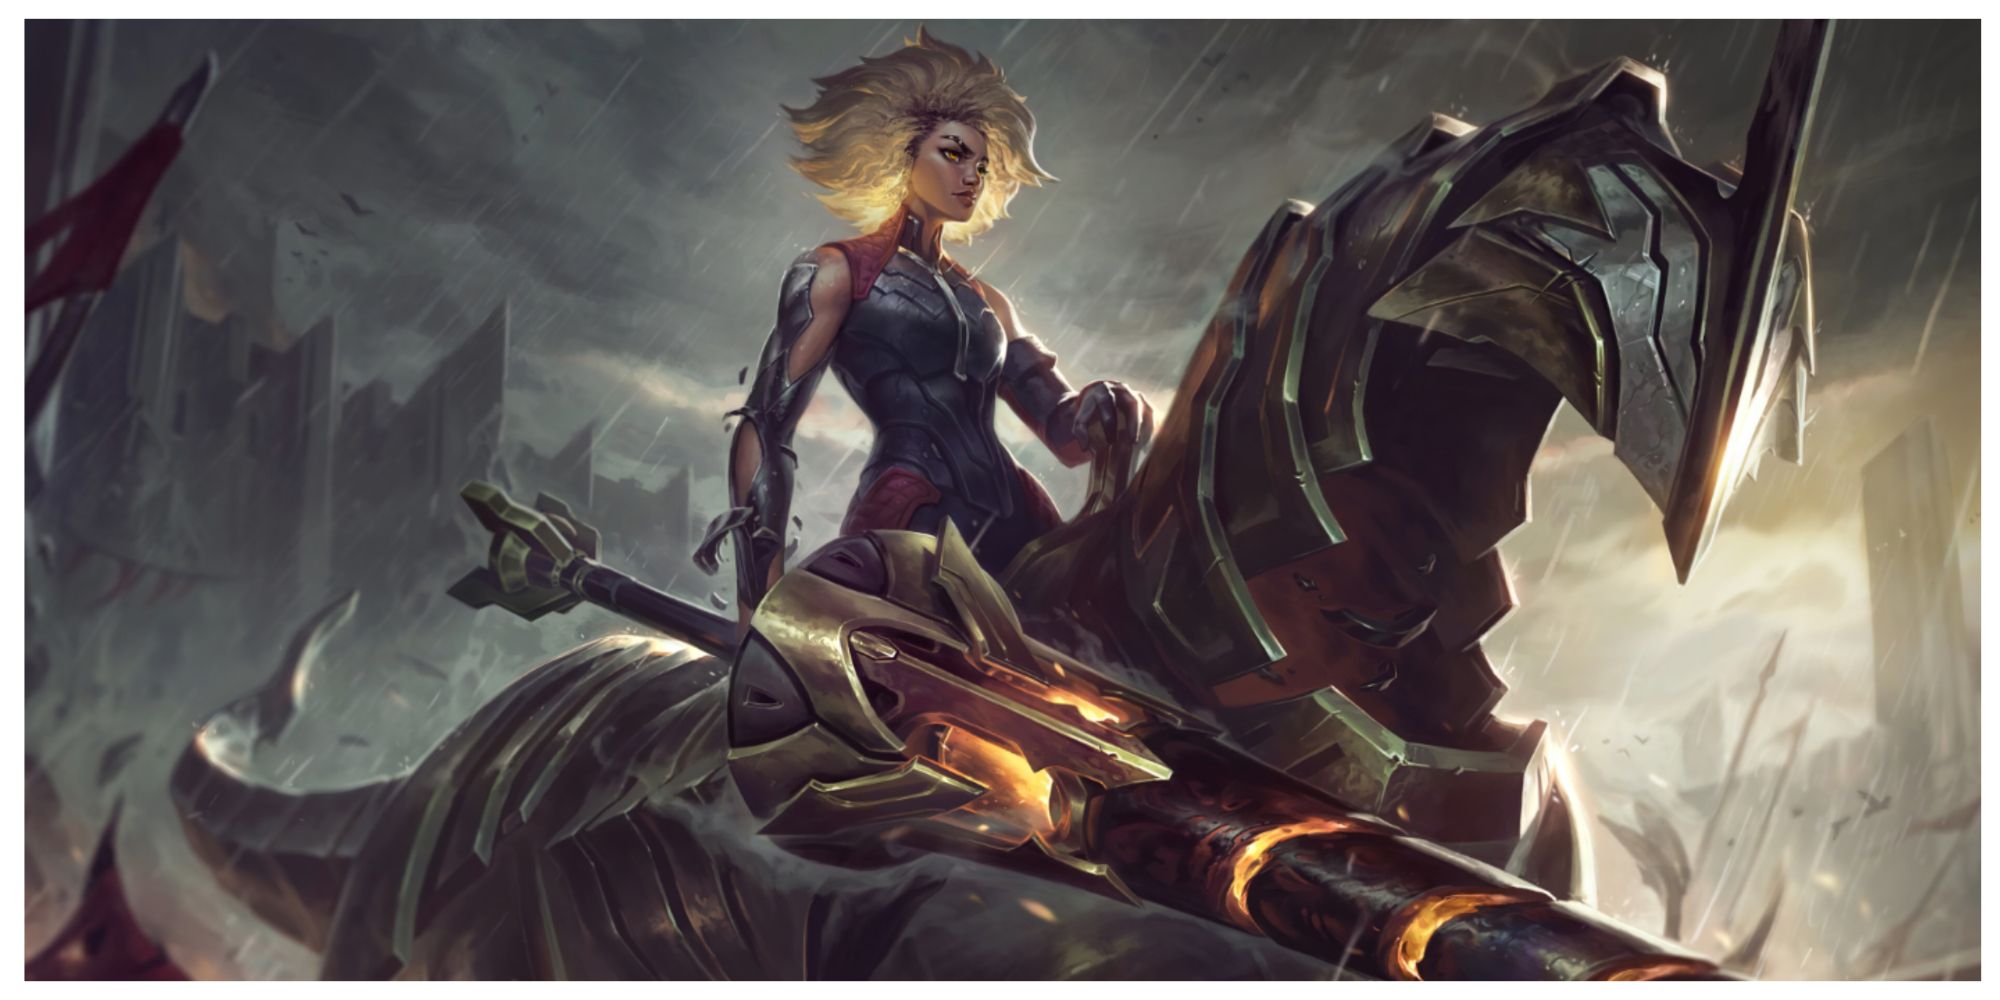 Rell, The Iron Maiden riding her metal horse, a giant lance in her hand, her hair wild as it rains. She is clad in armor